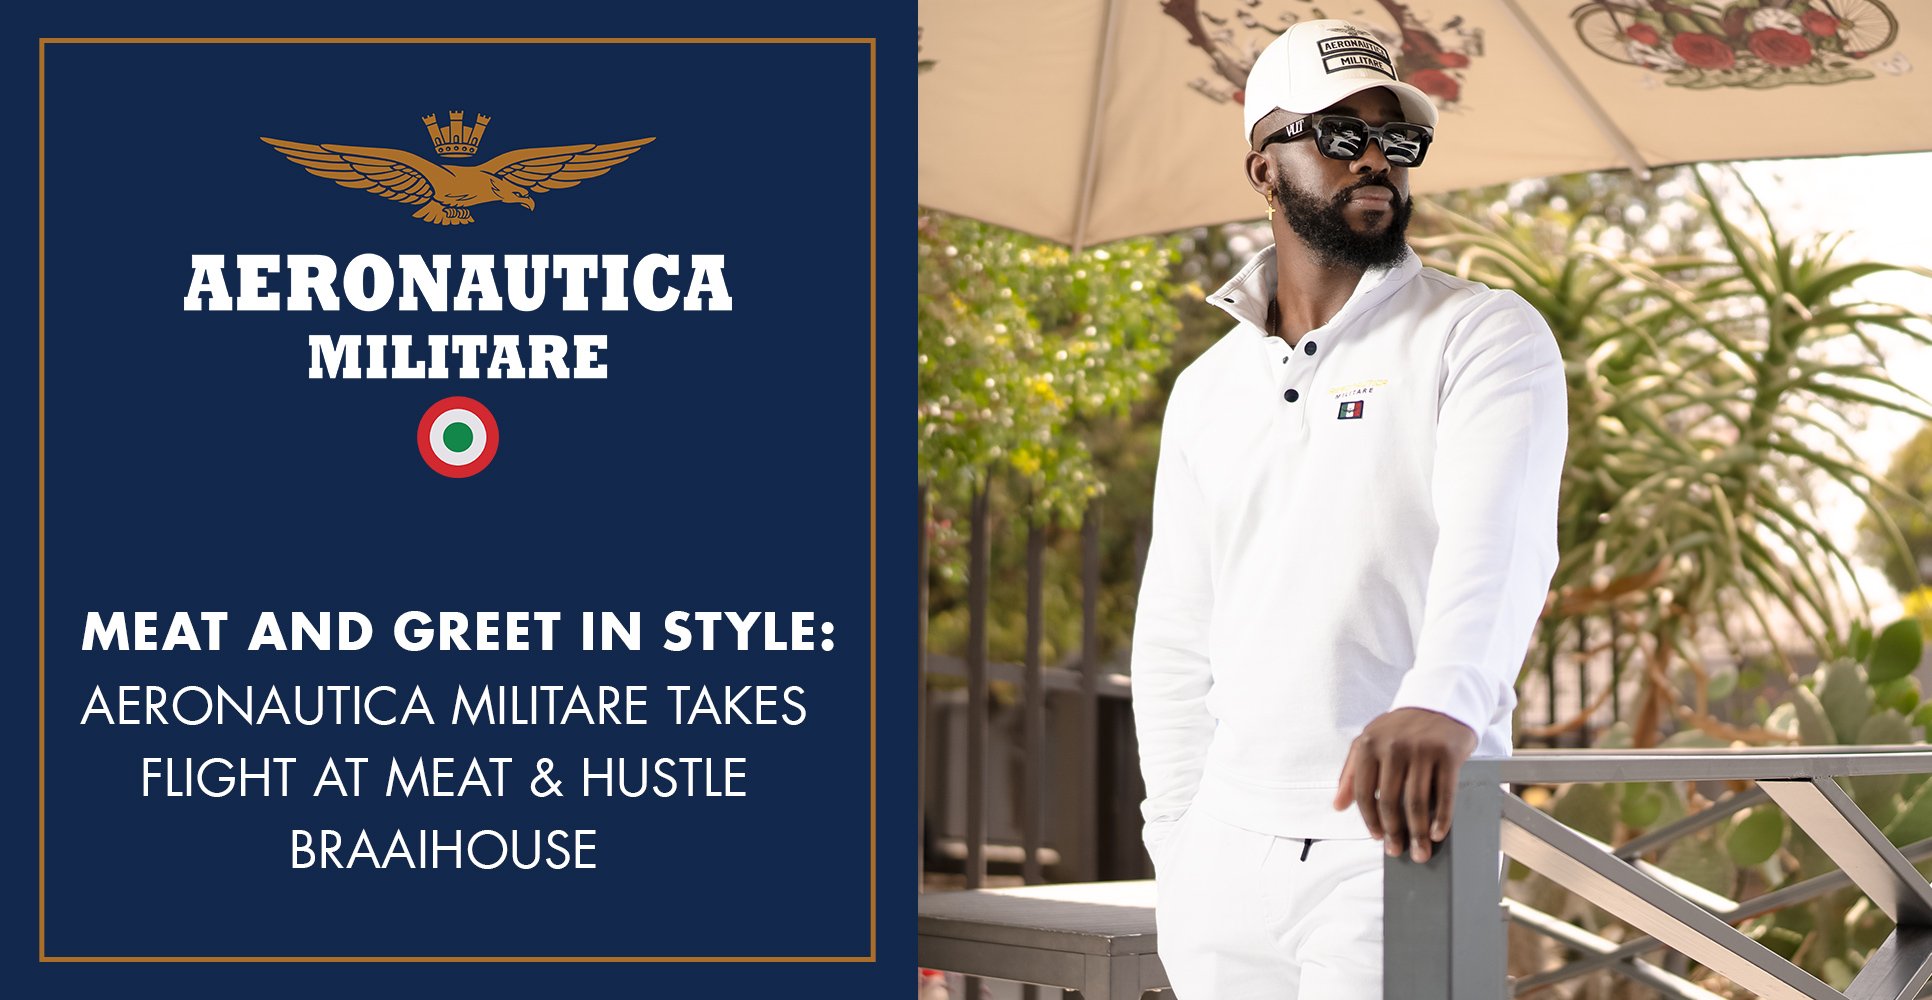 Meat and Greet in Style: Aeronautica Militare Takes Flight at Meat & Hustle Braaihouse